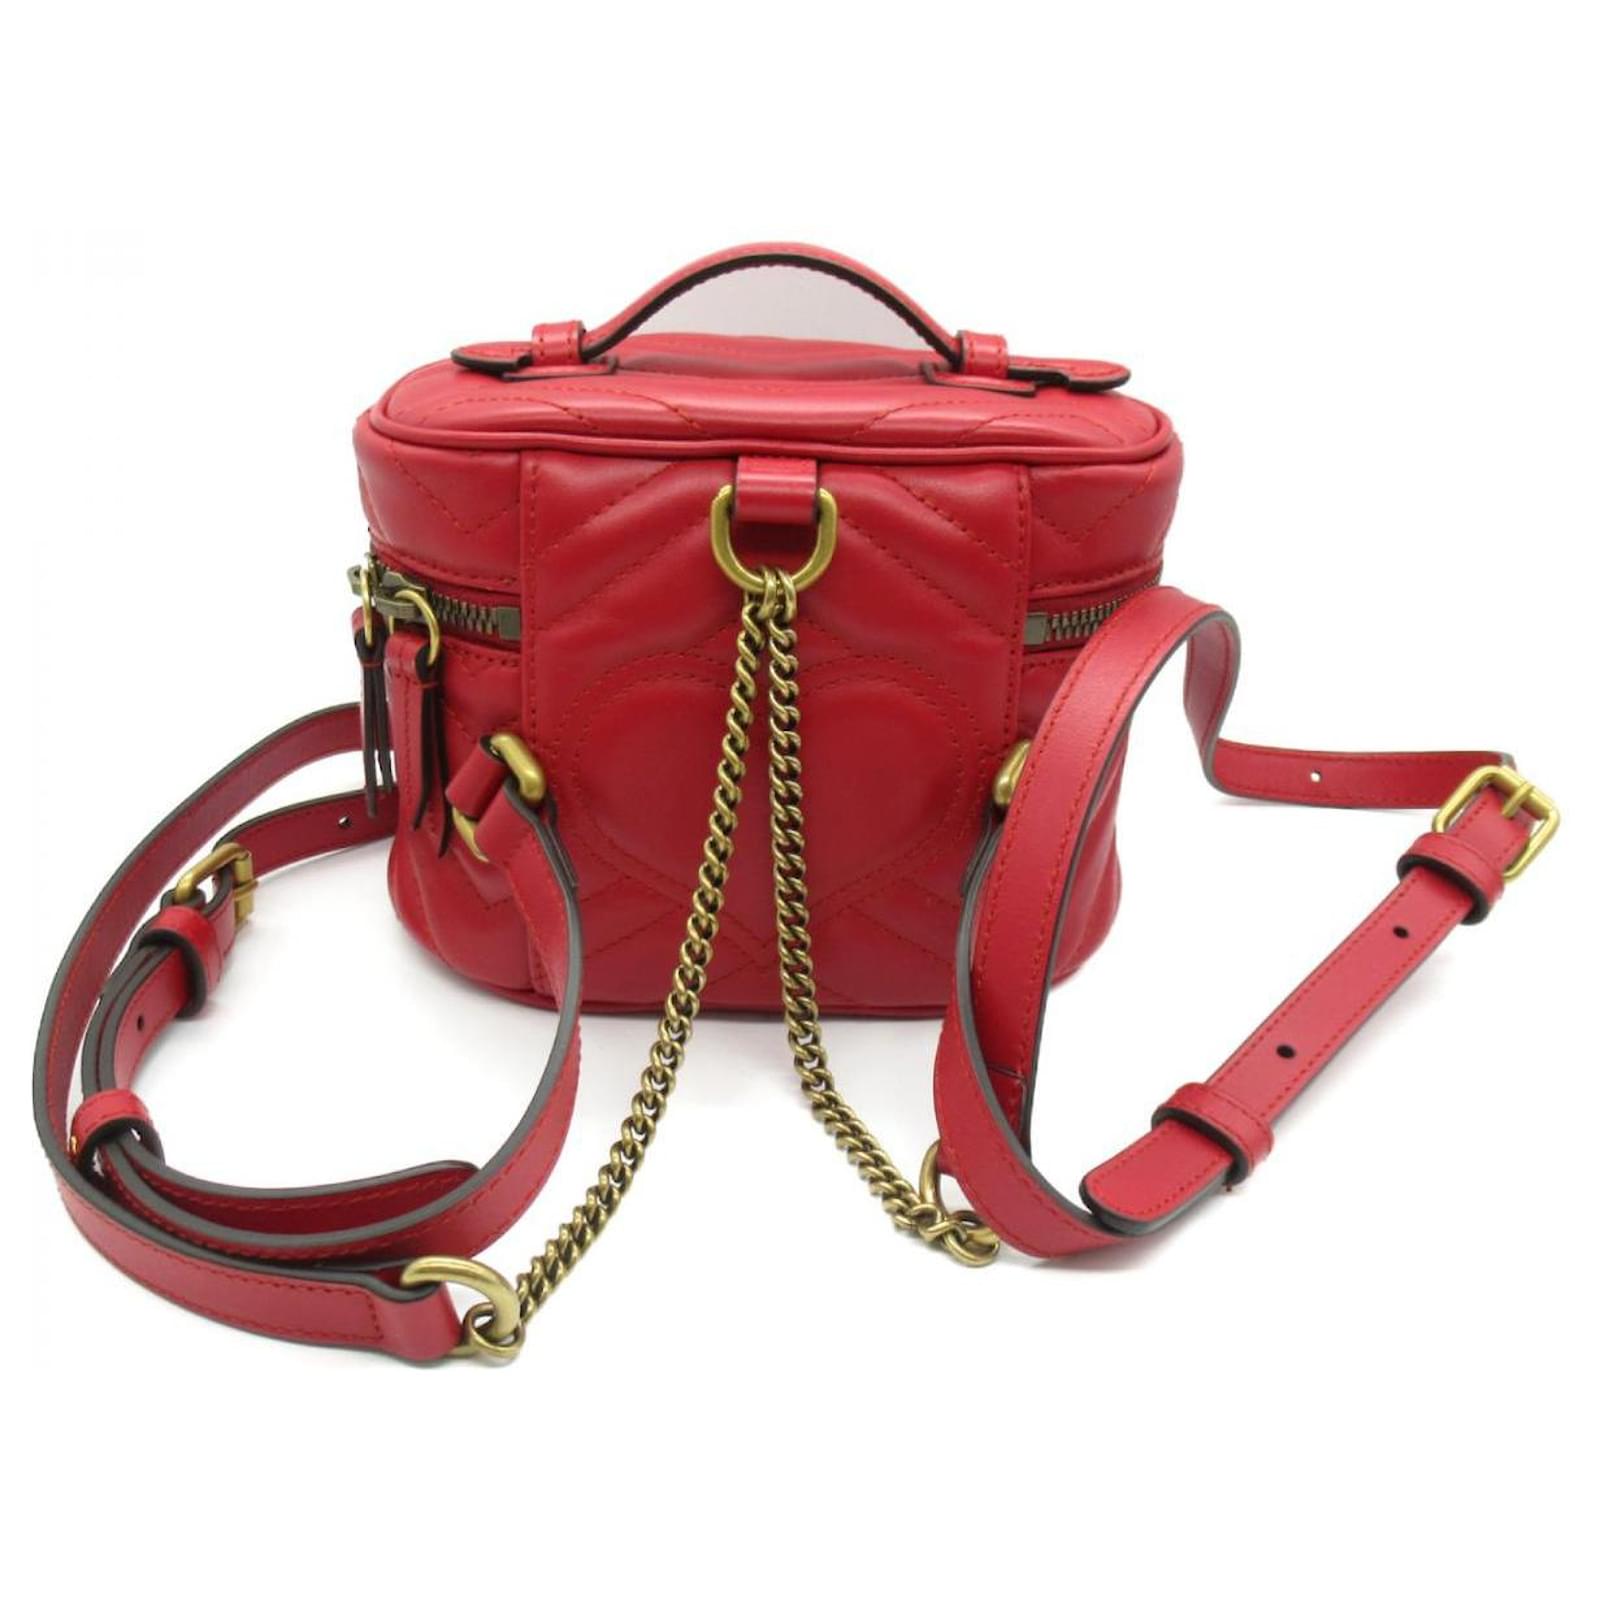 Gucci - Red Leather 'Gg' Marmont Backpack Small